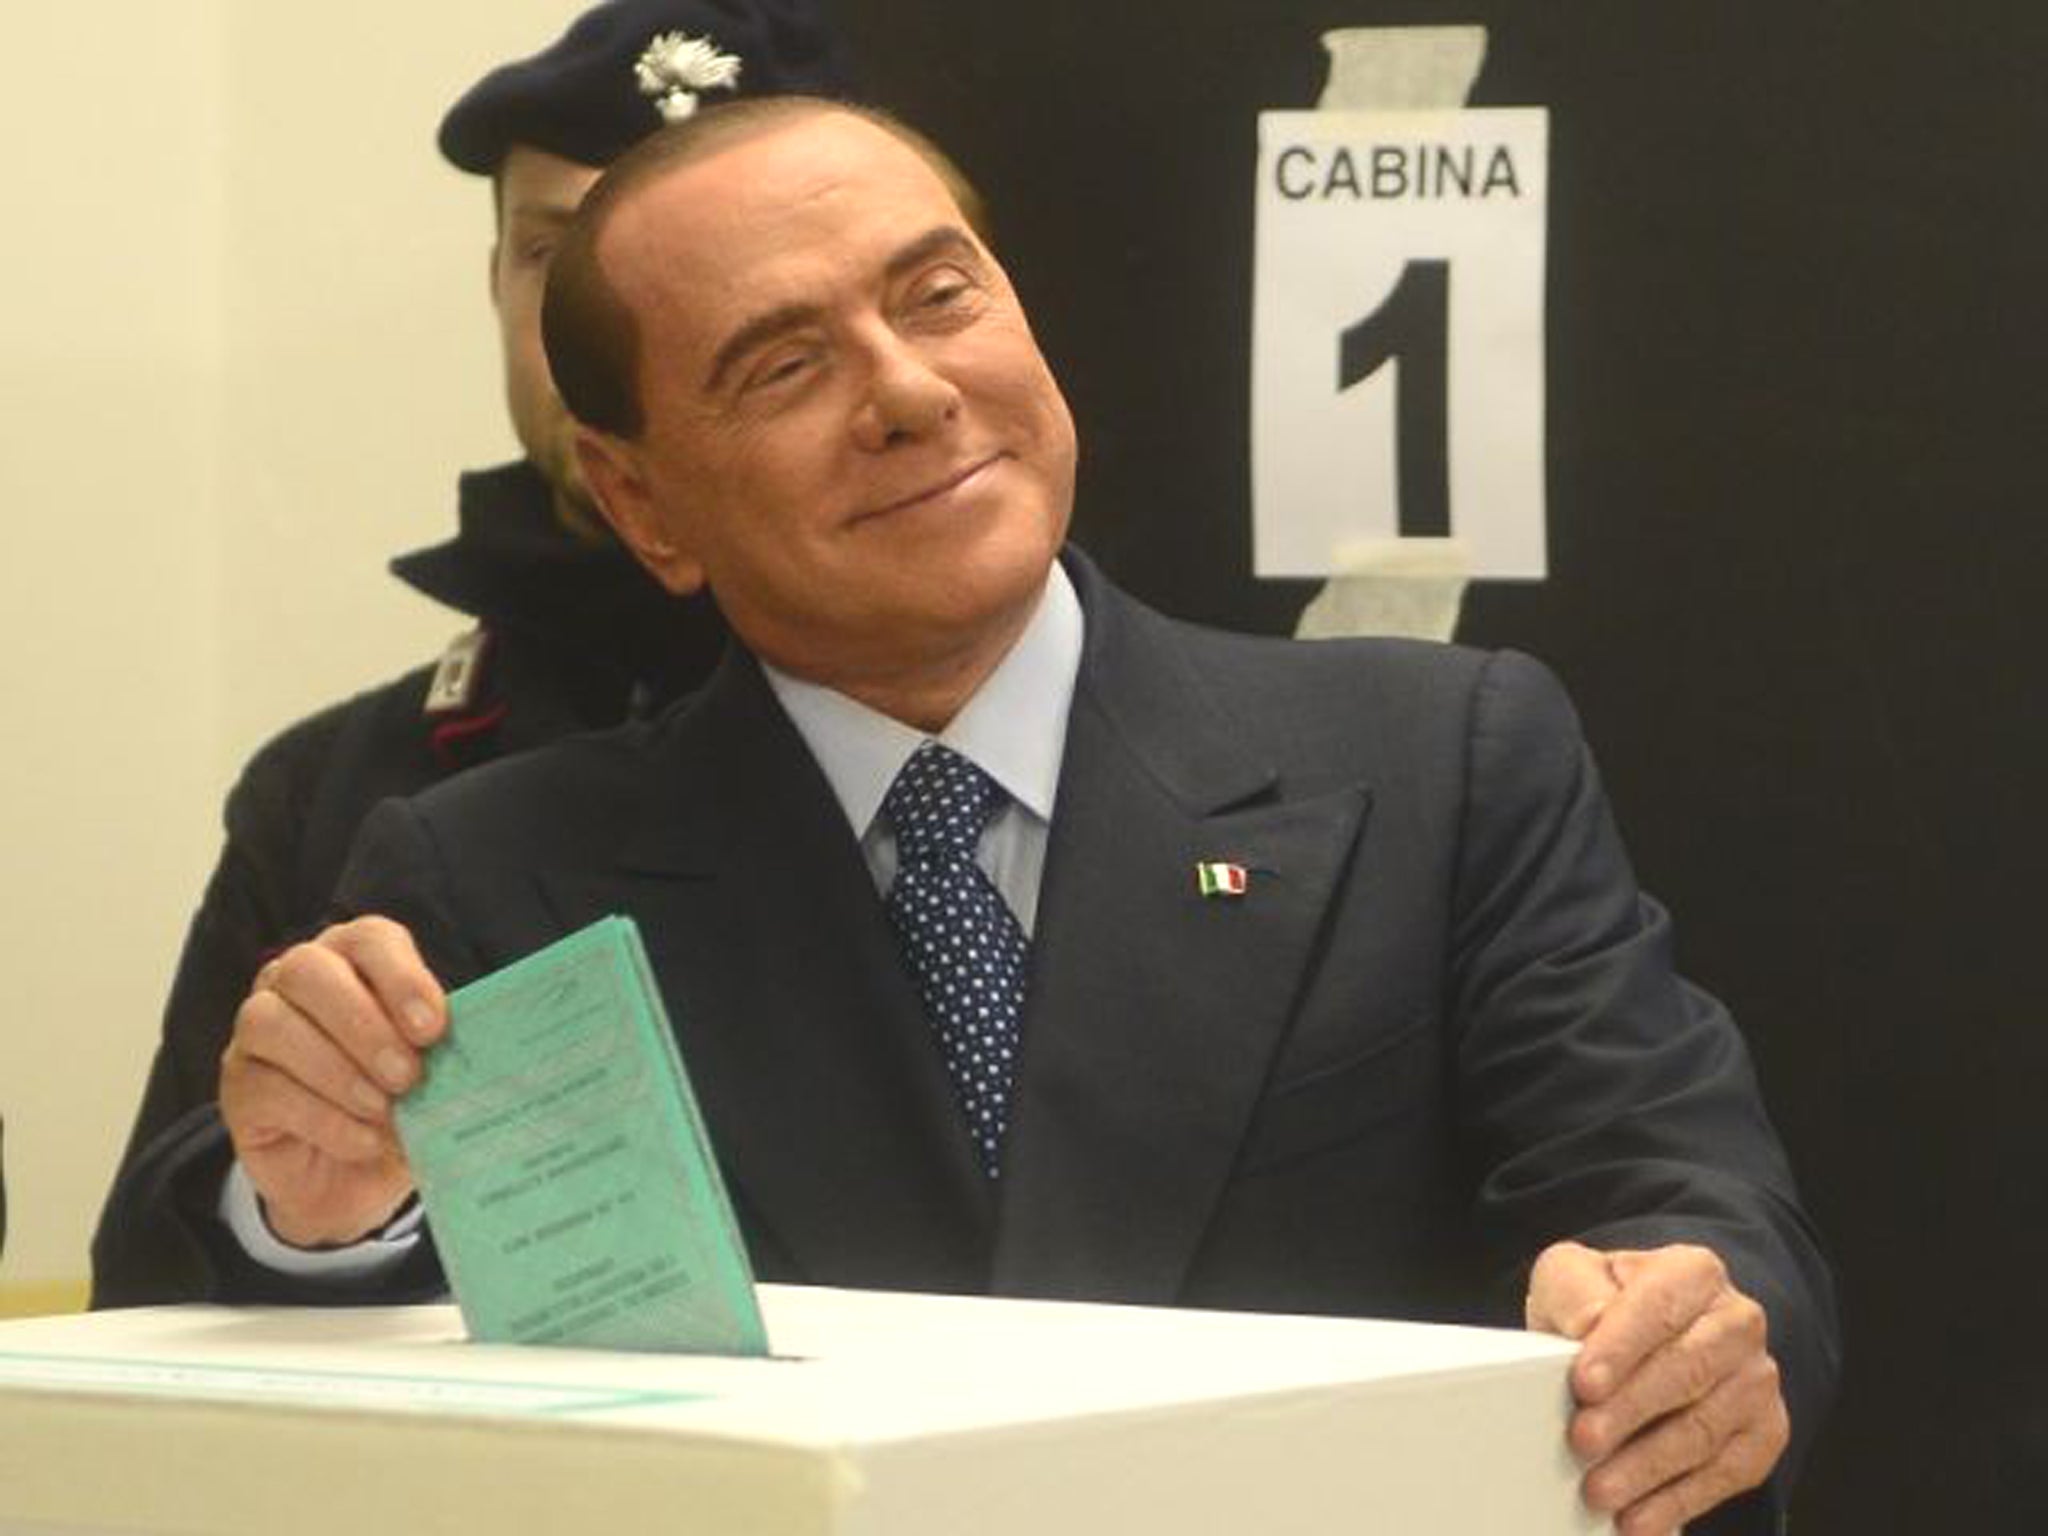 Italian former Prime Minister Silvio Berlusconi casts his ballot at a polling station